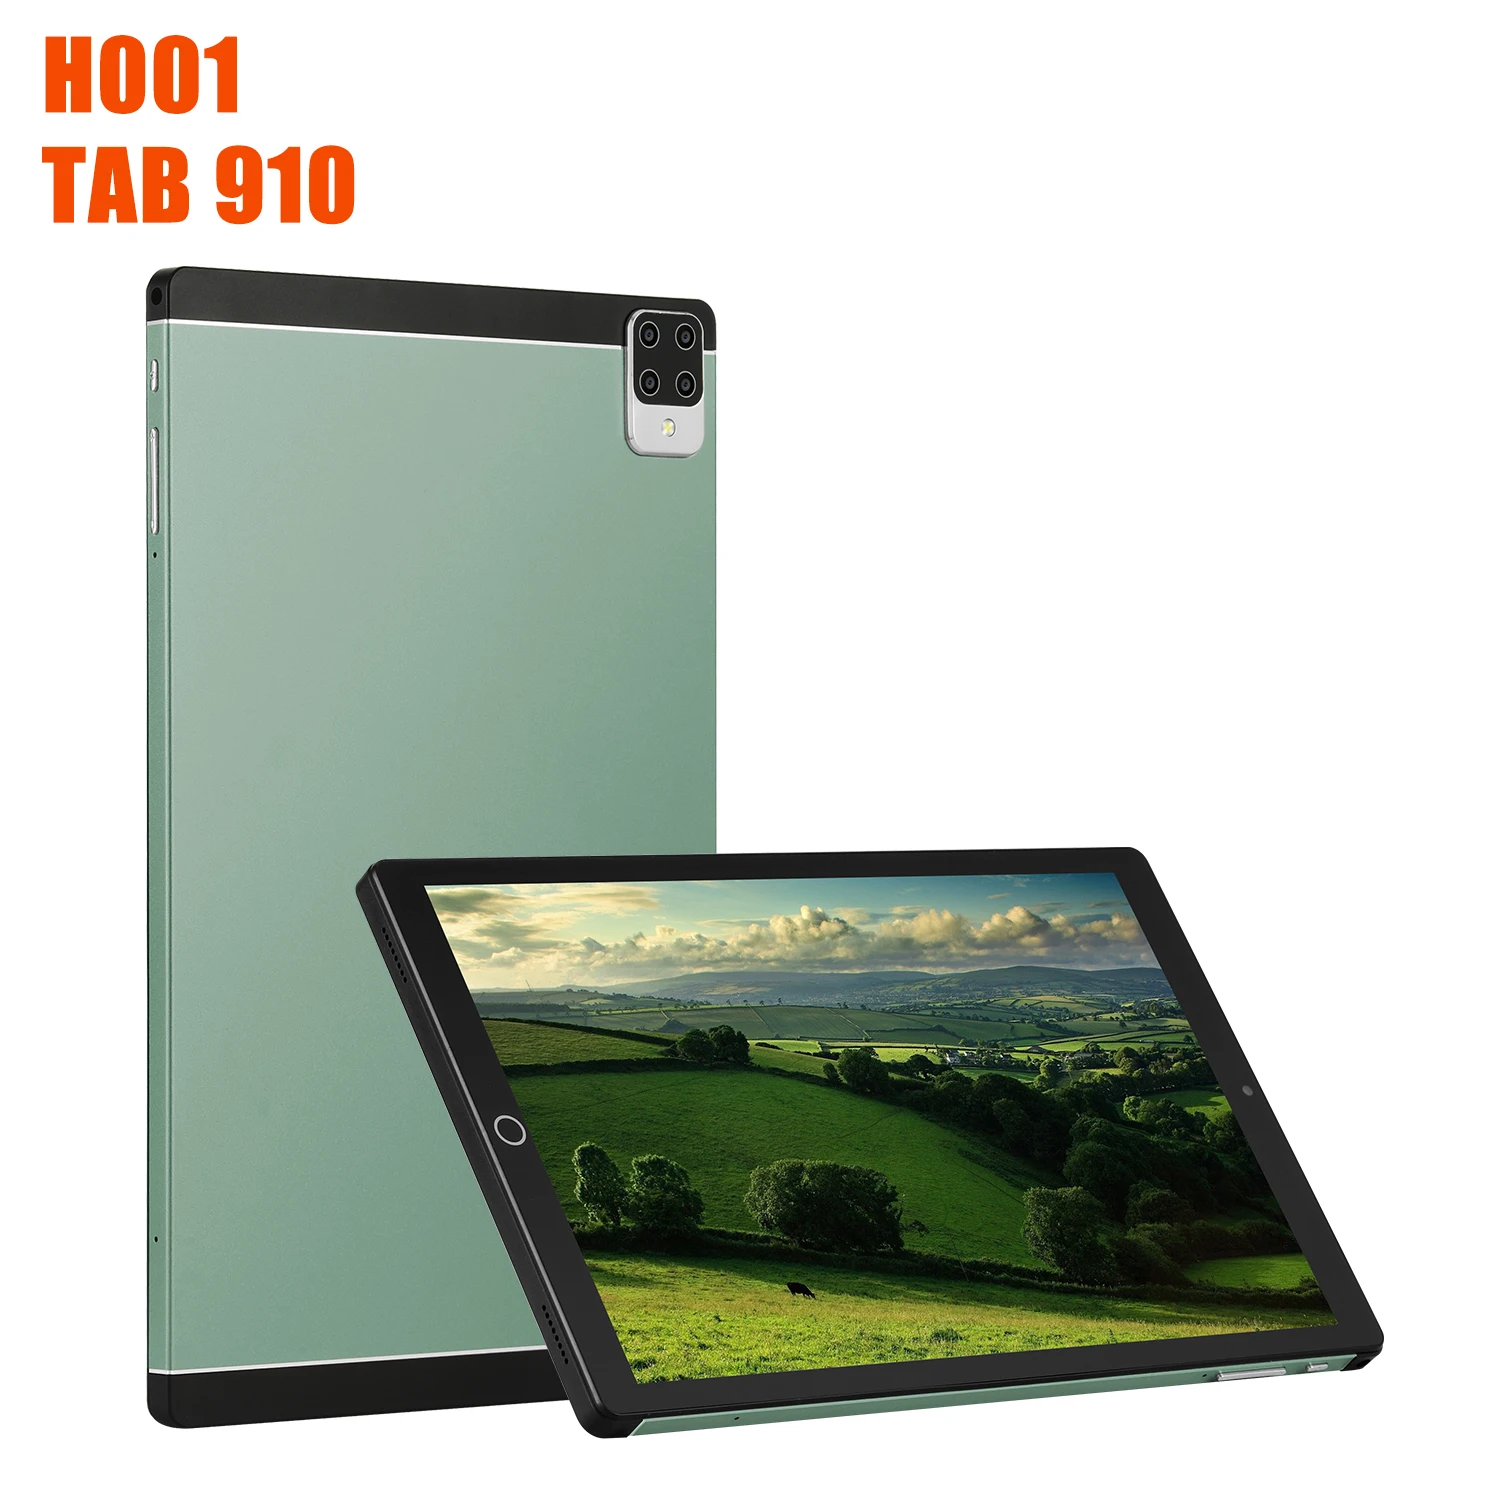 10 Inch Tablet Android10.0 Android Tablet GPS WPS Office Cheap Notebook 16MP+32MP Camera Laptop Pad Pro WIFI Google Play TAB910 best cheap android tablet Tablets